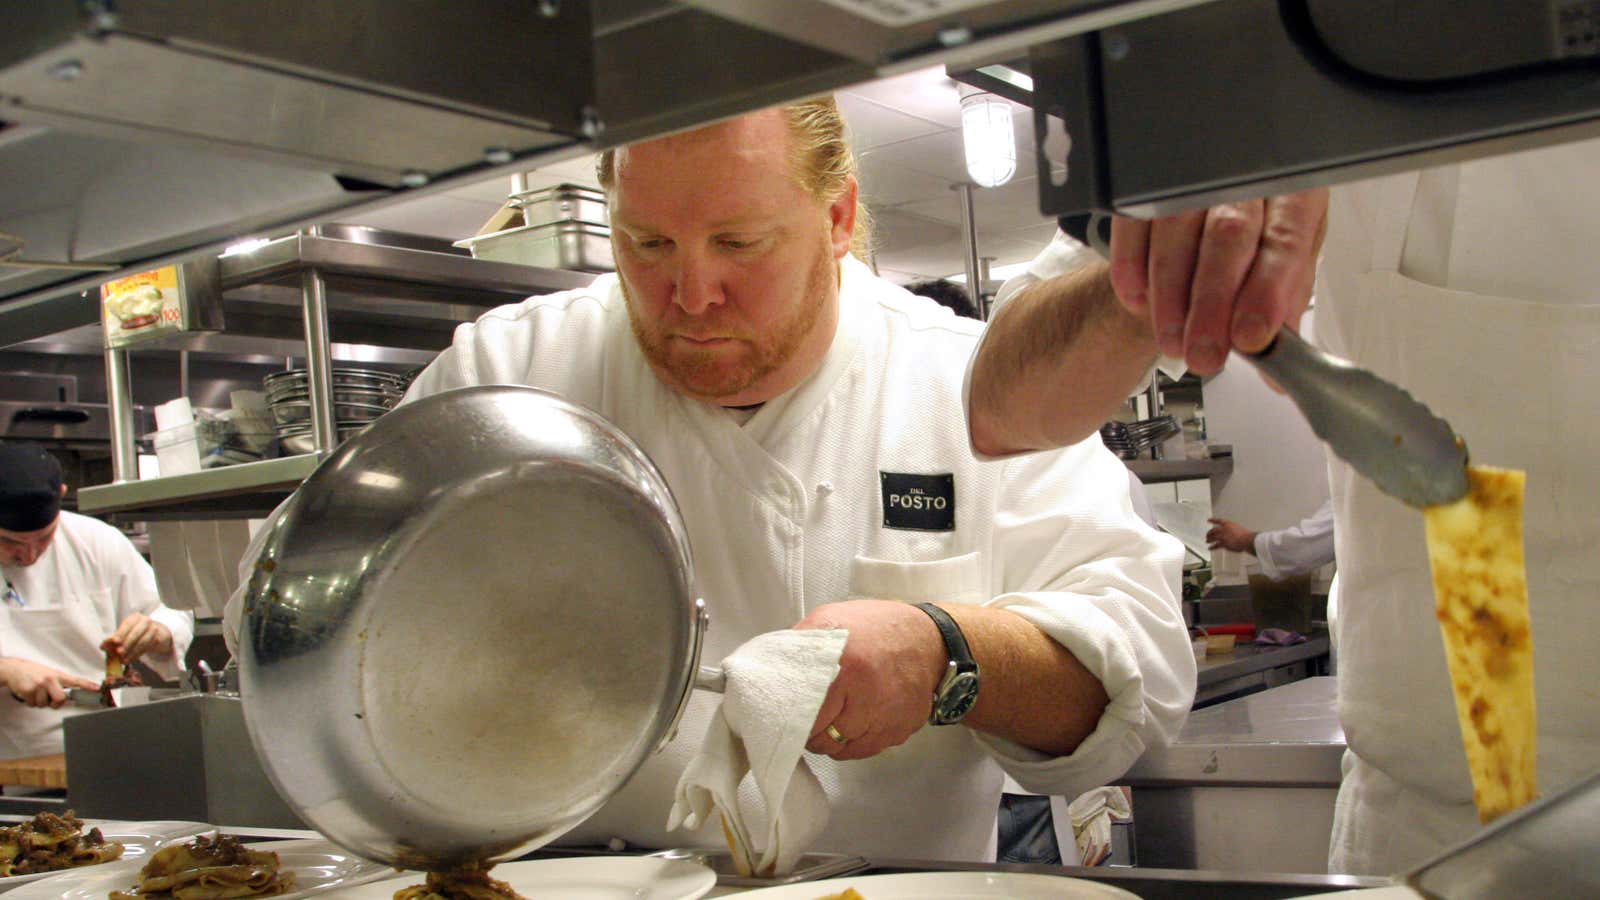 Trouble in the kitchen for Mario Batali.